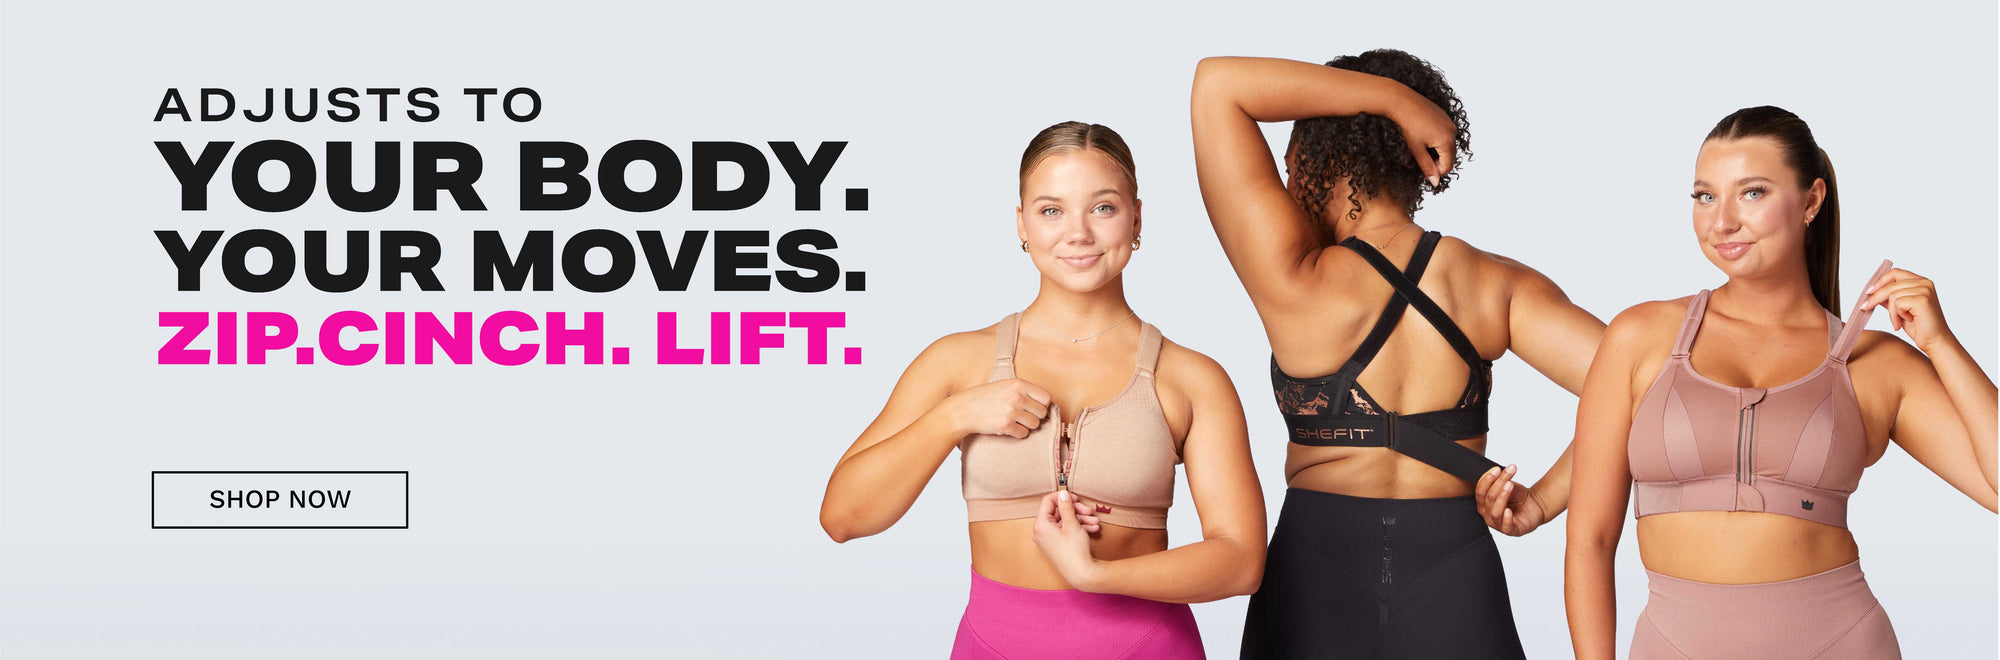 SHEFIT® on X: “I have gotten this question quite a bit so I figured I  would share the ONLY BRA I WILL EVER WORKOUT IN FOR THE REST OF MY LIFE  (.seriouslynothing